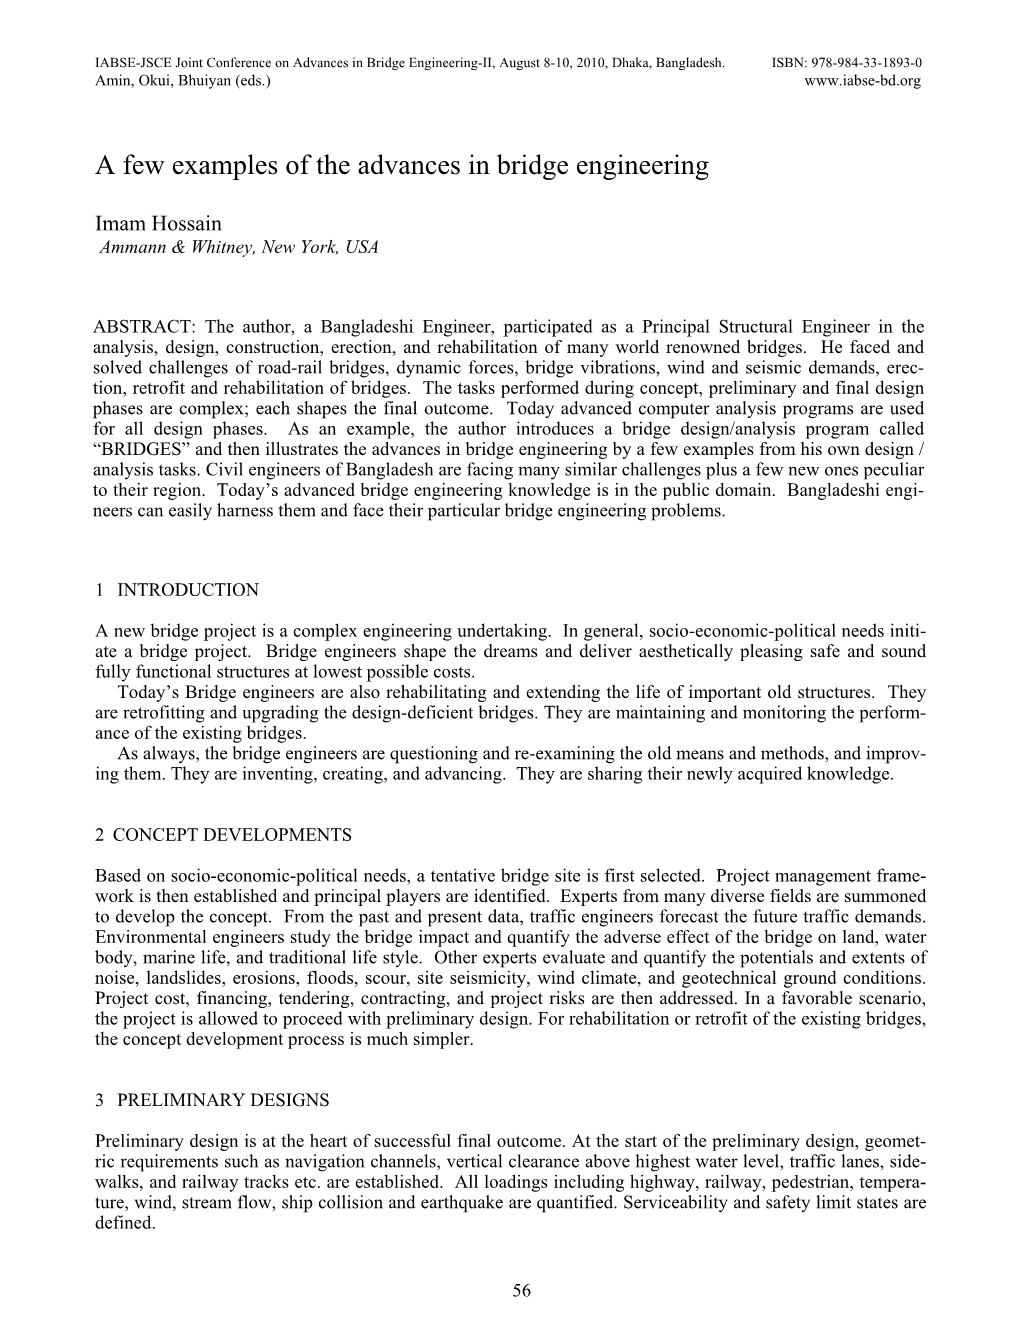 A Few Examples of the Advances in Bridge Engineering